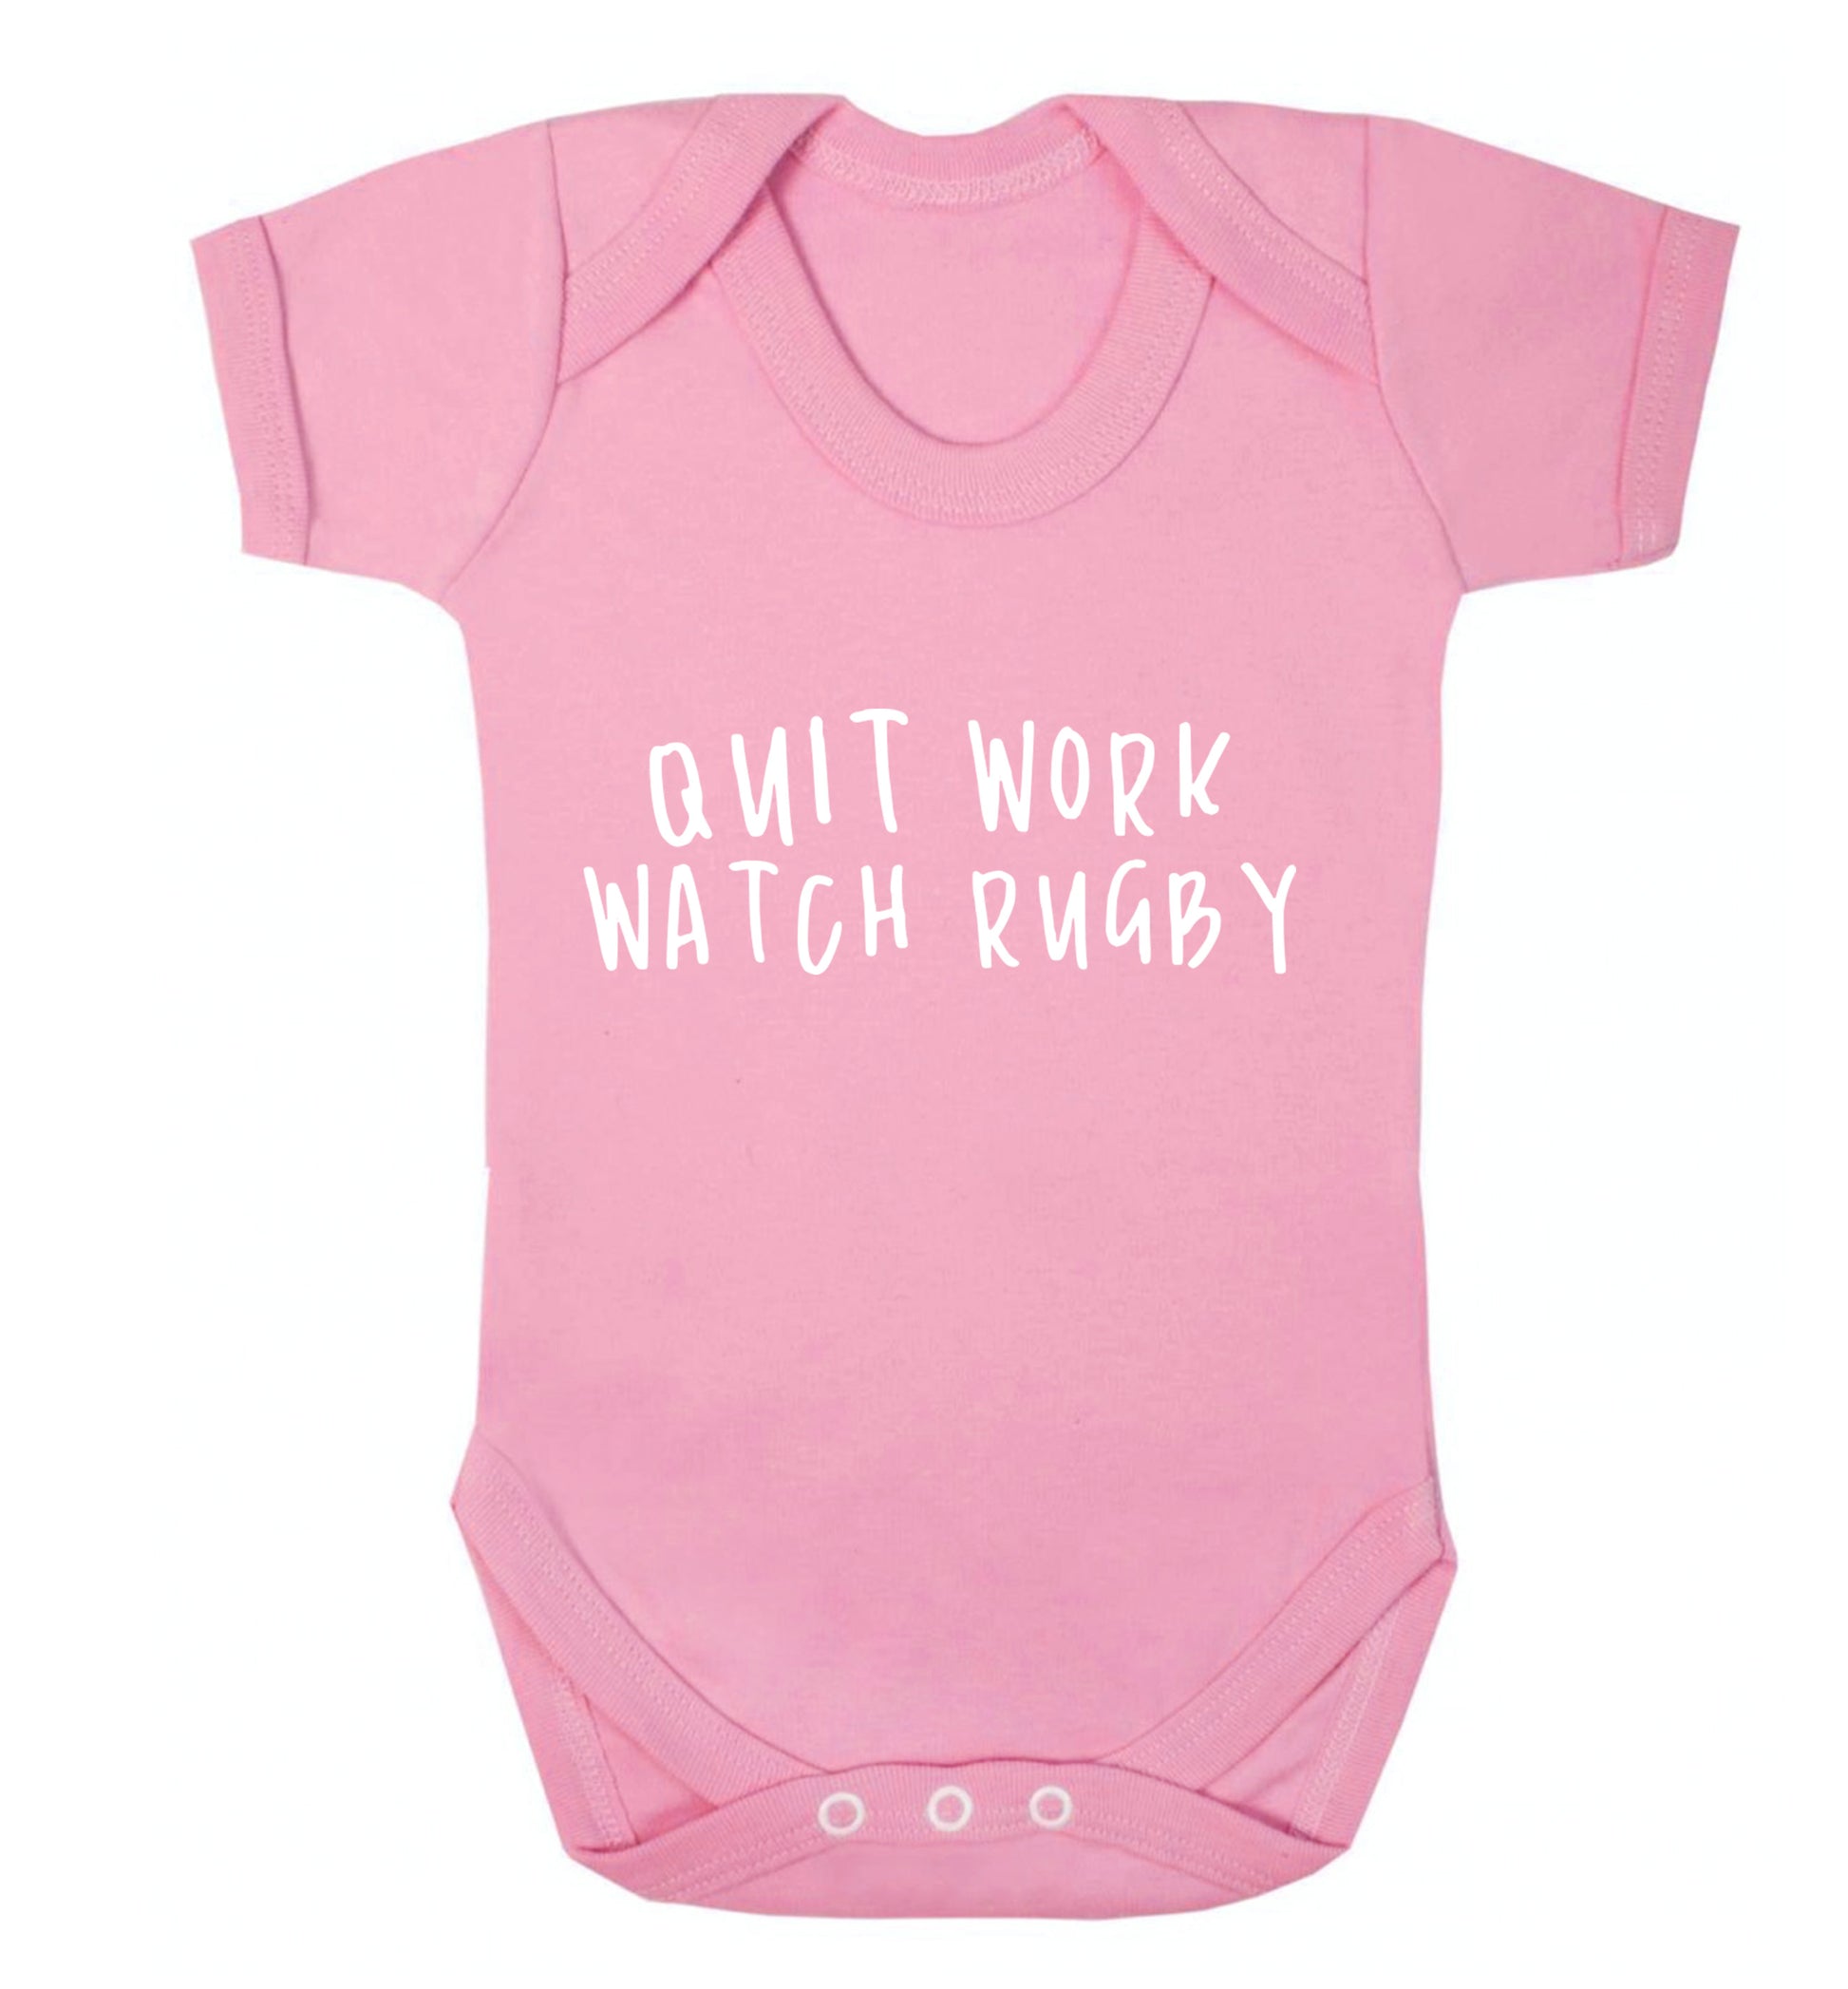 Quit work watch rugby Baby Vest pale pink 18-24 months